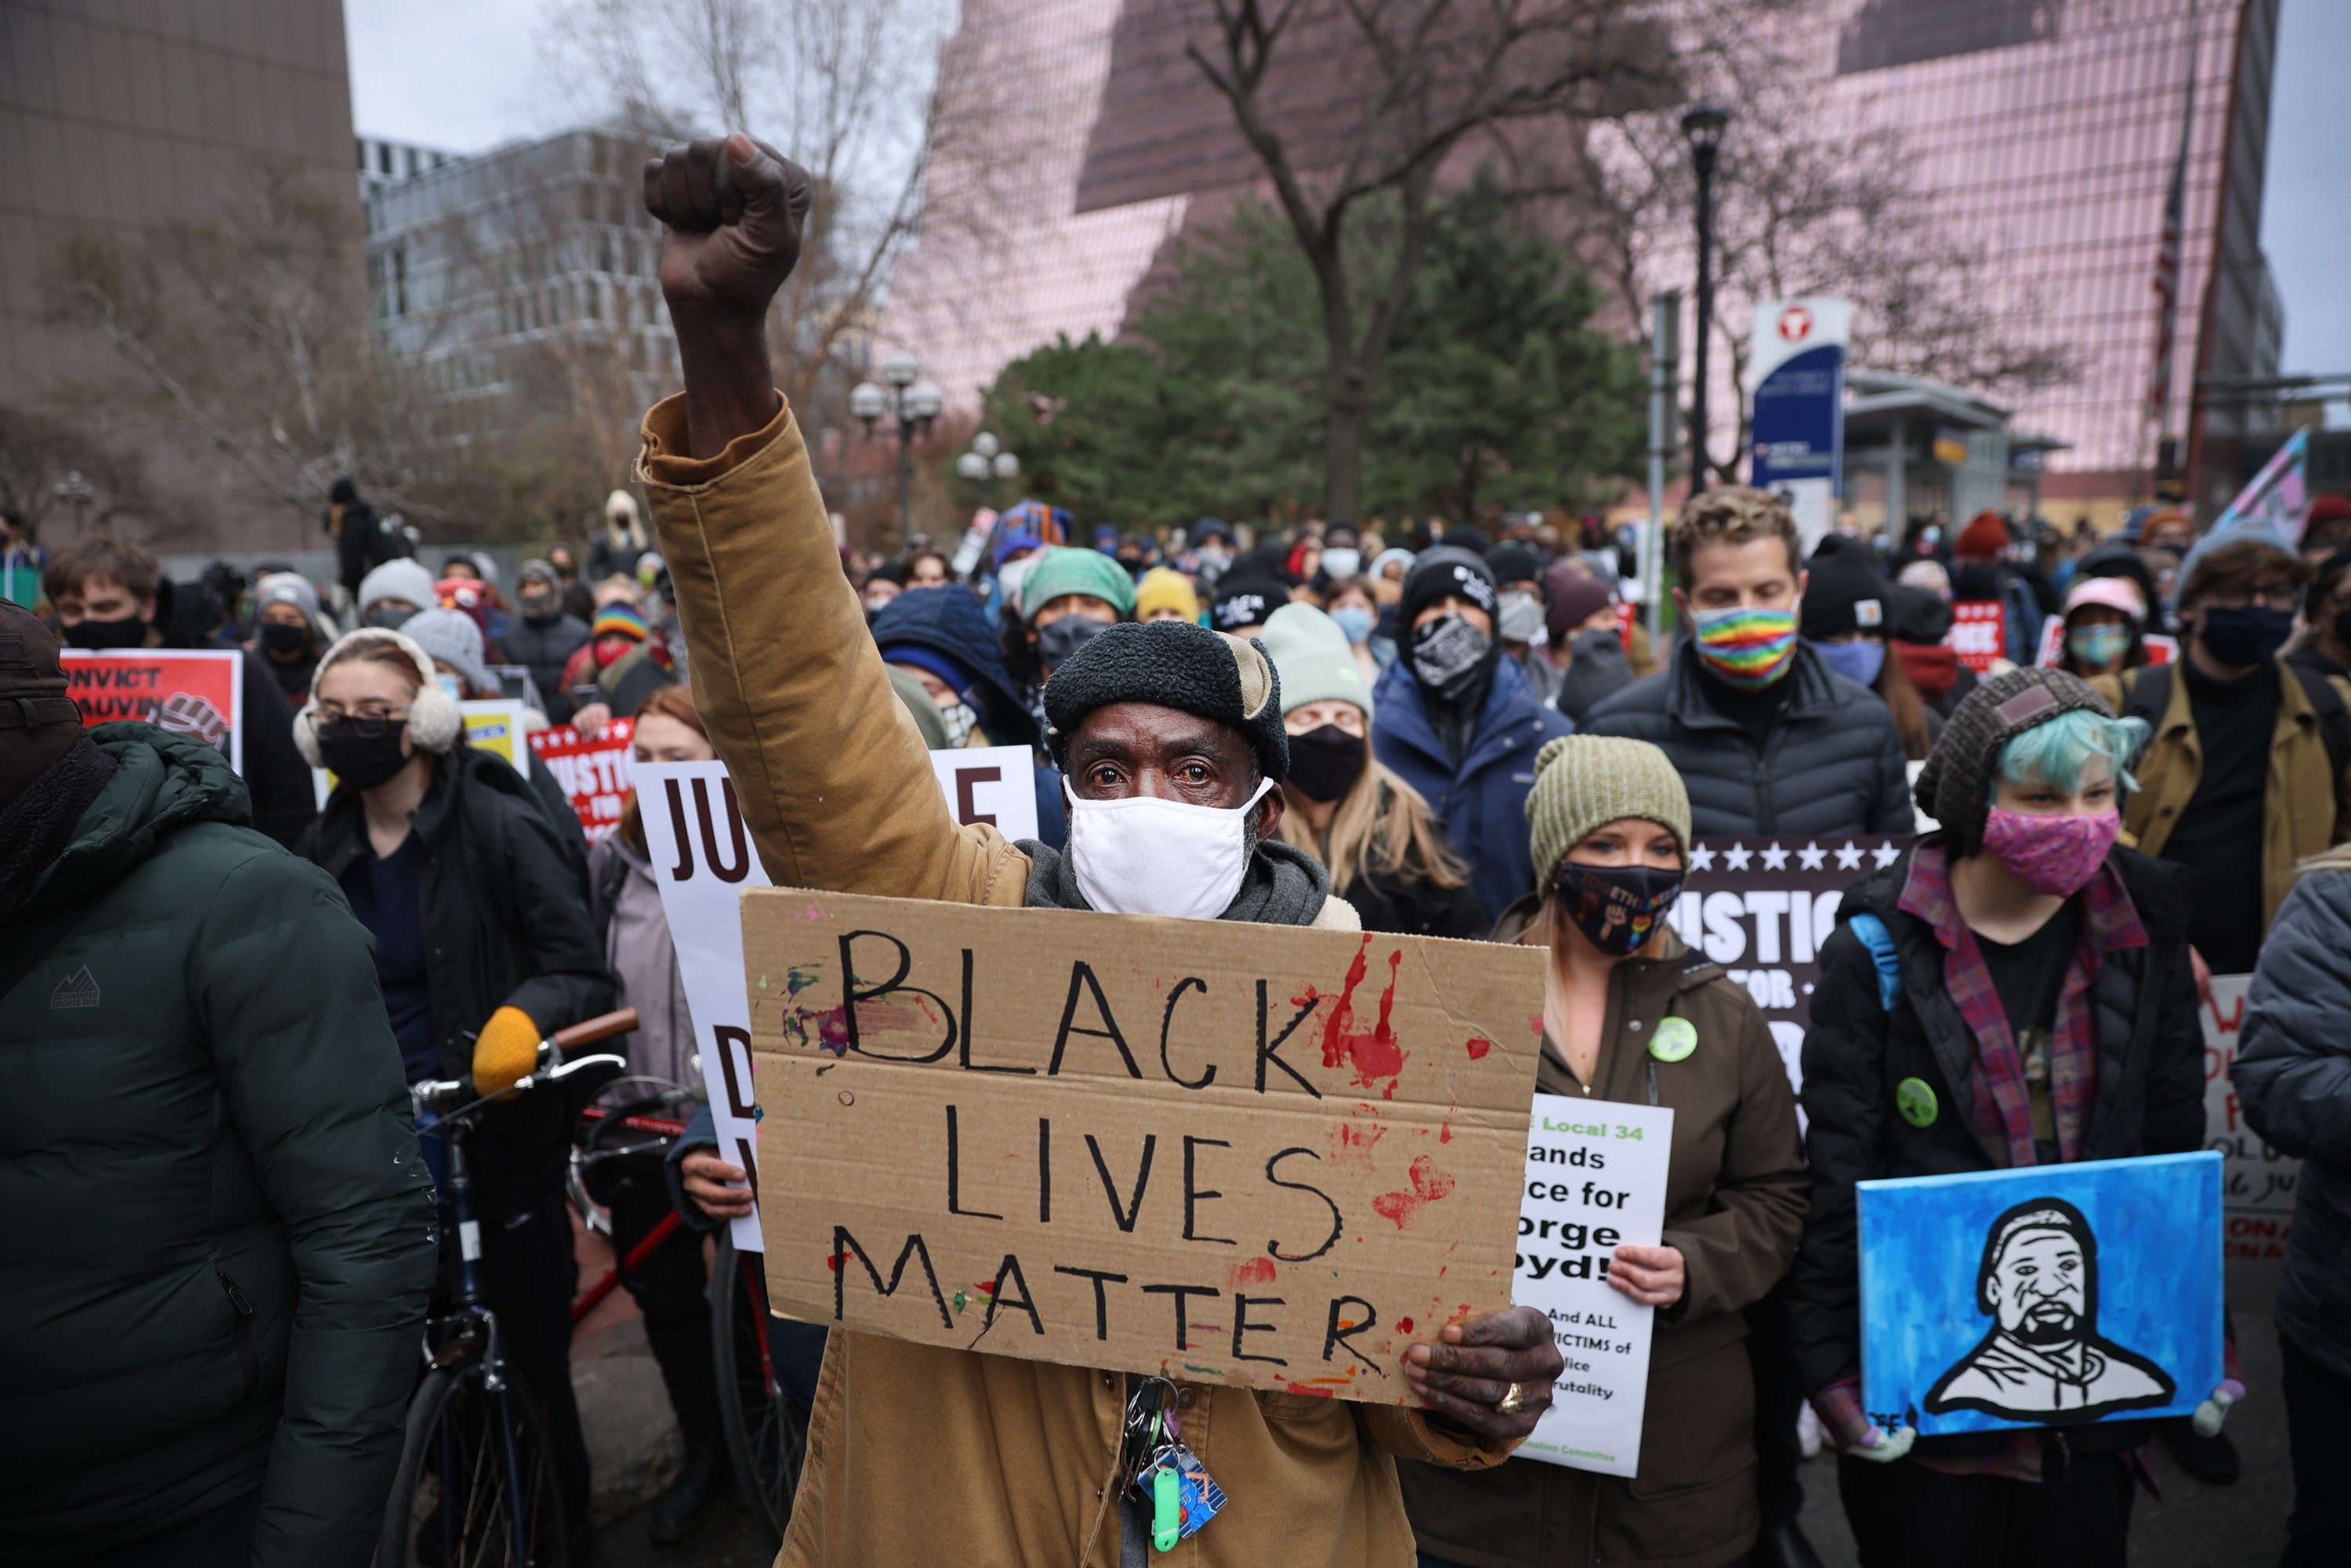 Demonstrators protest near the Hennepin County Courthouse – scene of former police officer Derek Chauvin’s trial – on April 19 in Minneapolis, Minnesota. Photo: Getty Images/AFP